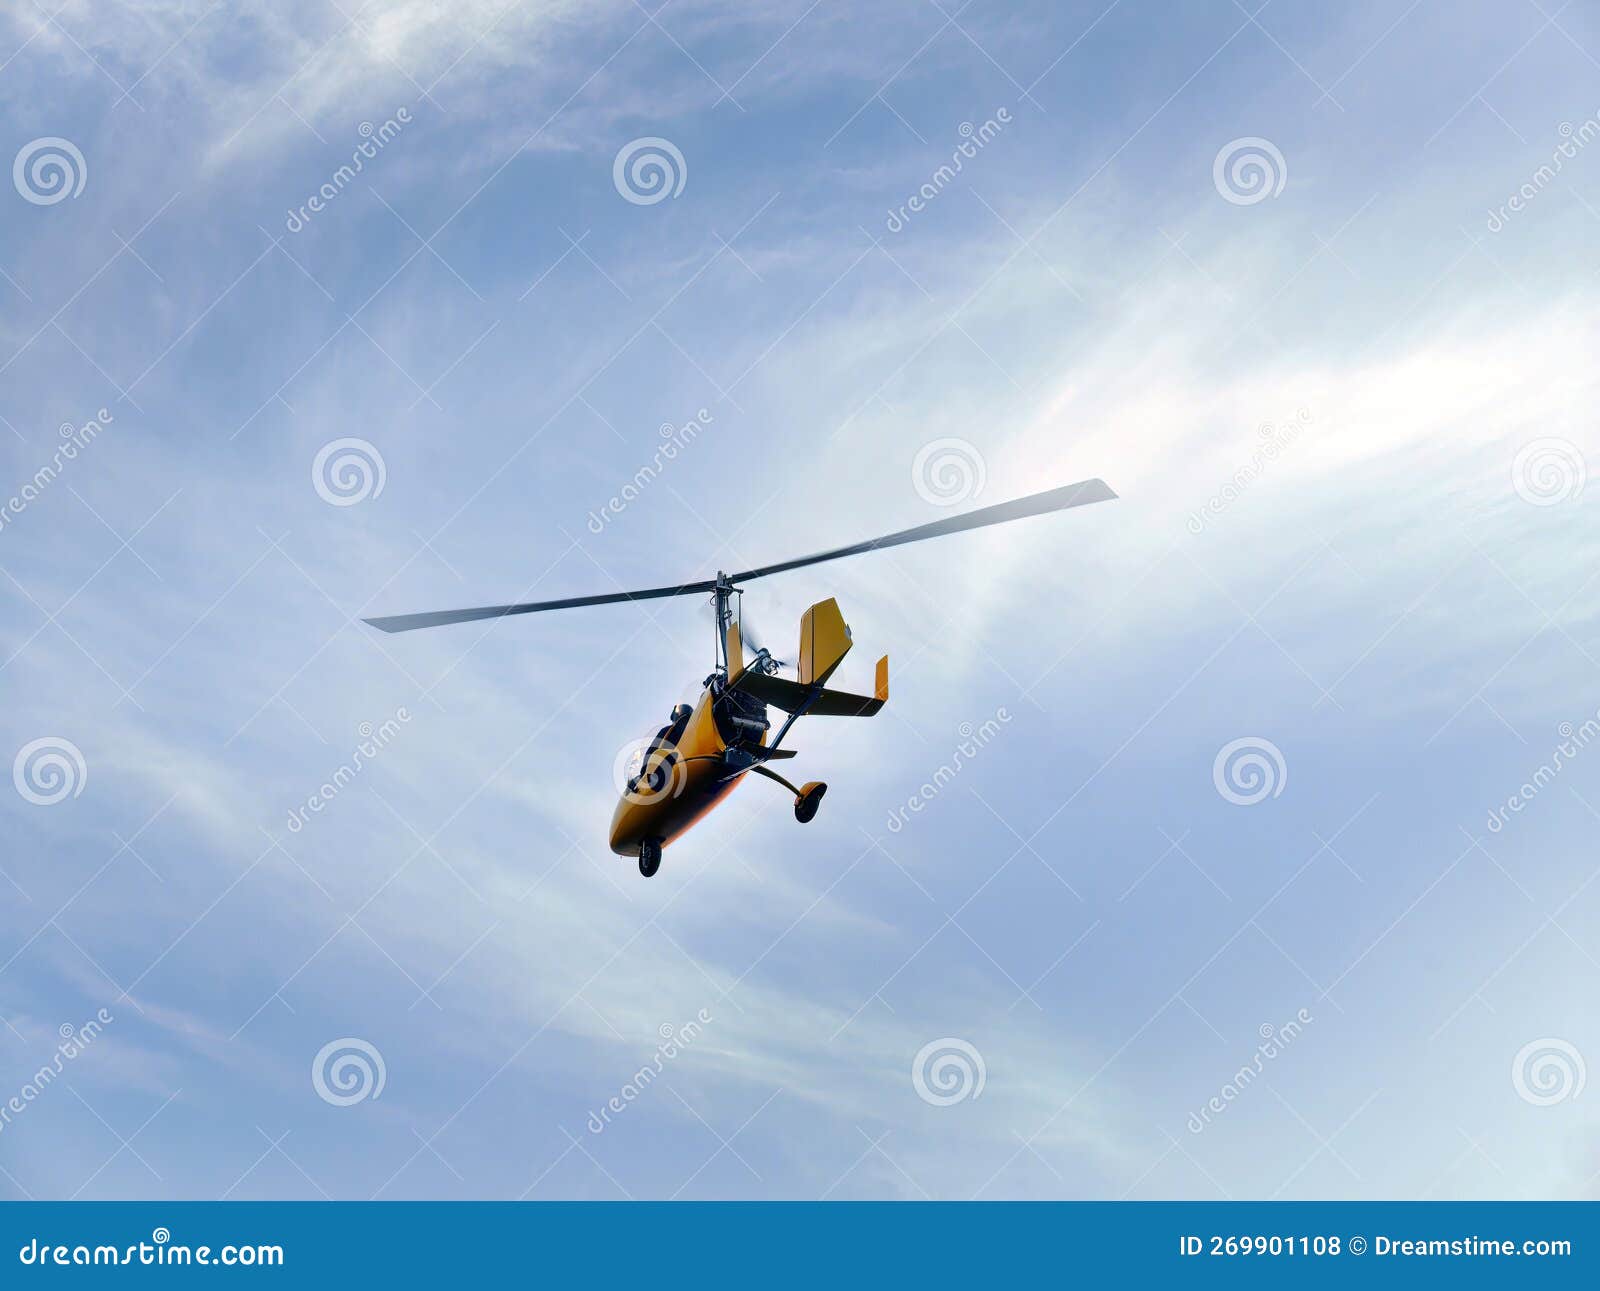 low angle view of yellow color gyrocopter flying in the blue sky and dramatic clouds, fun fly, aero sports, skydive, roto craft,